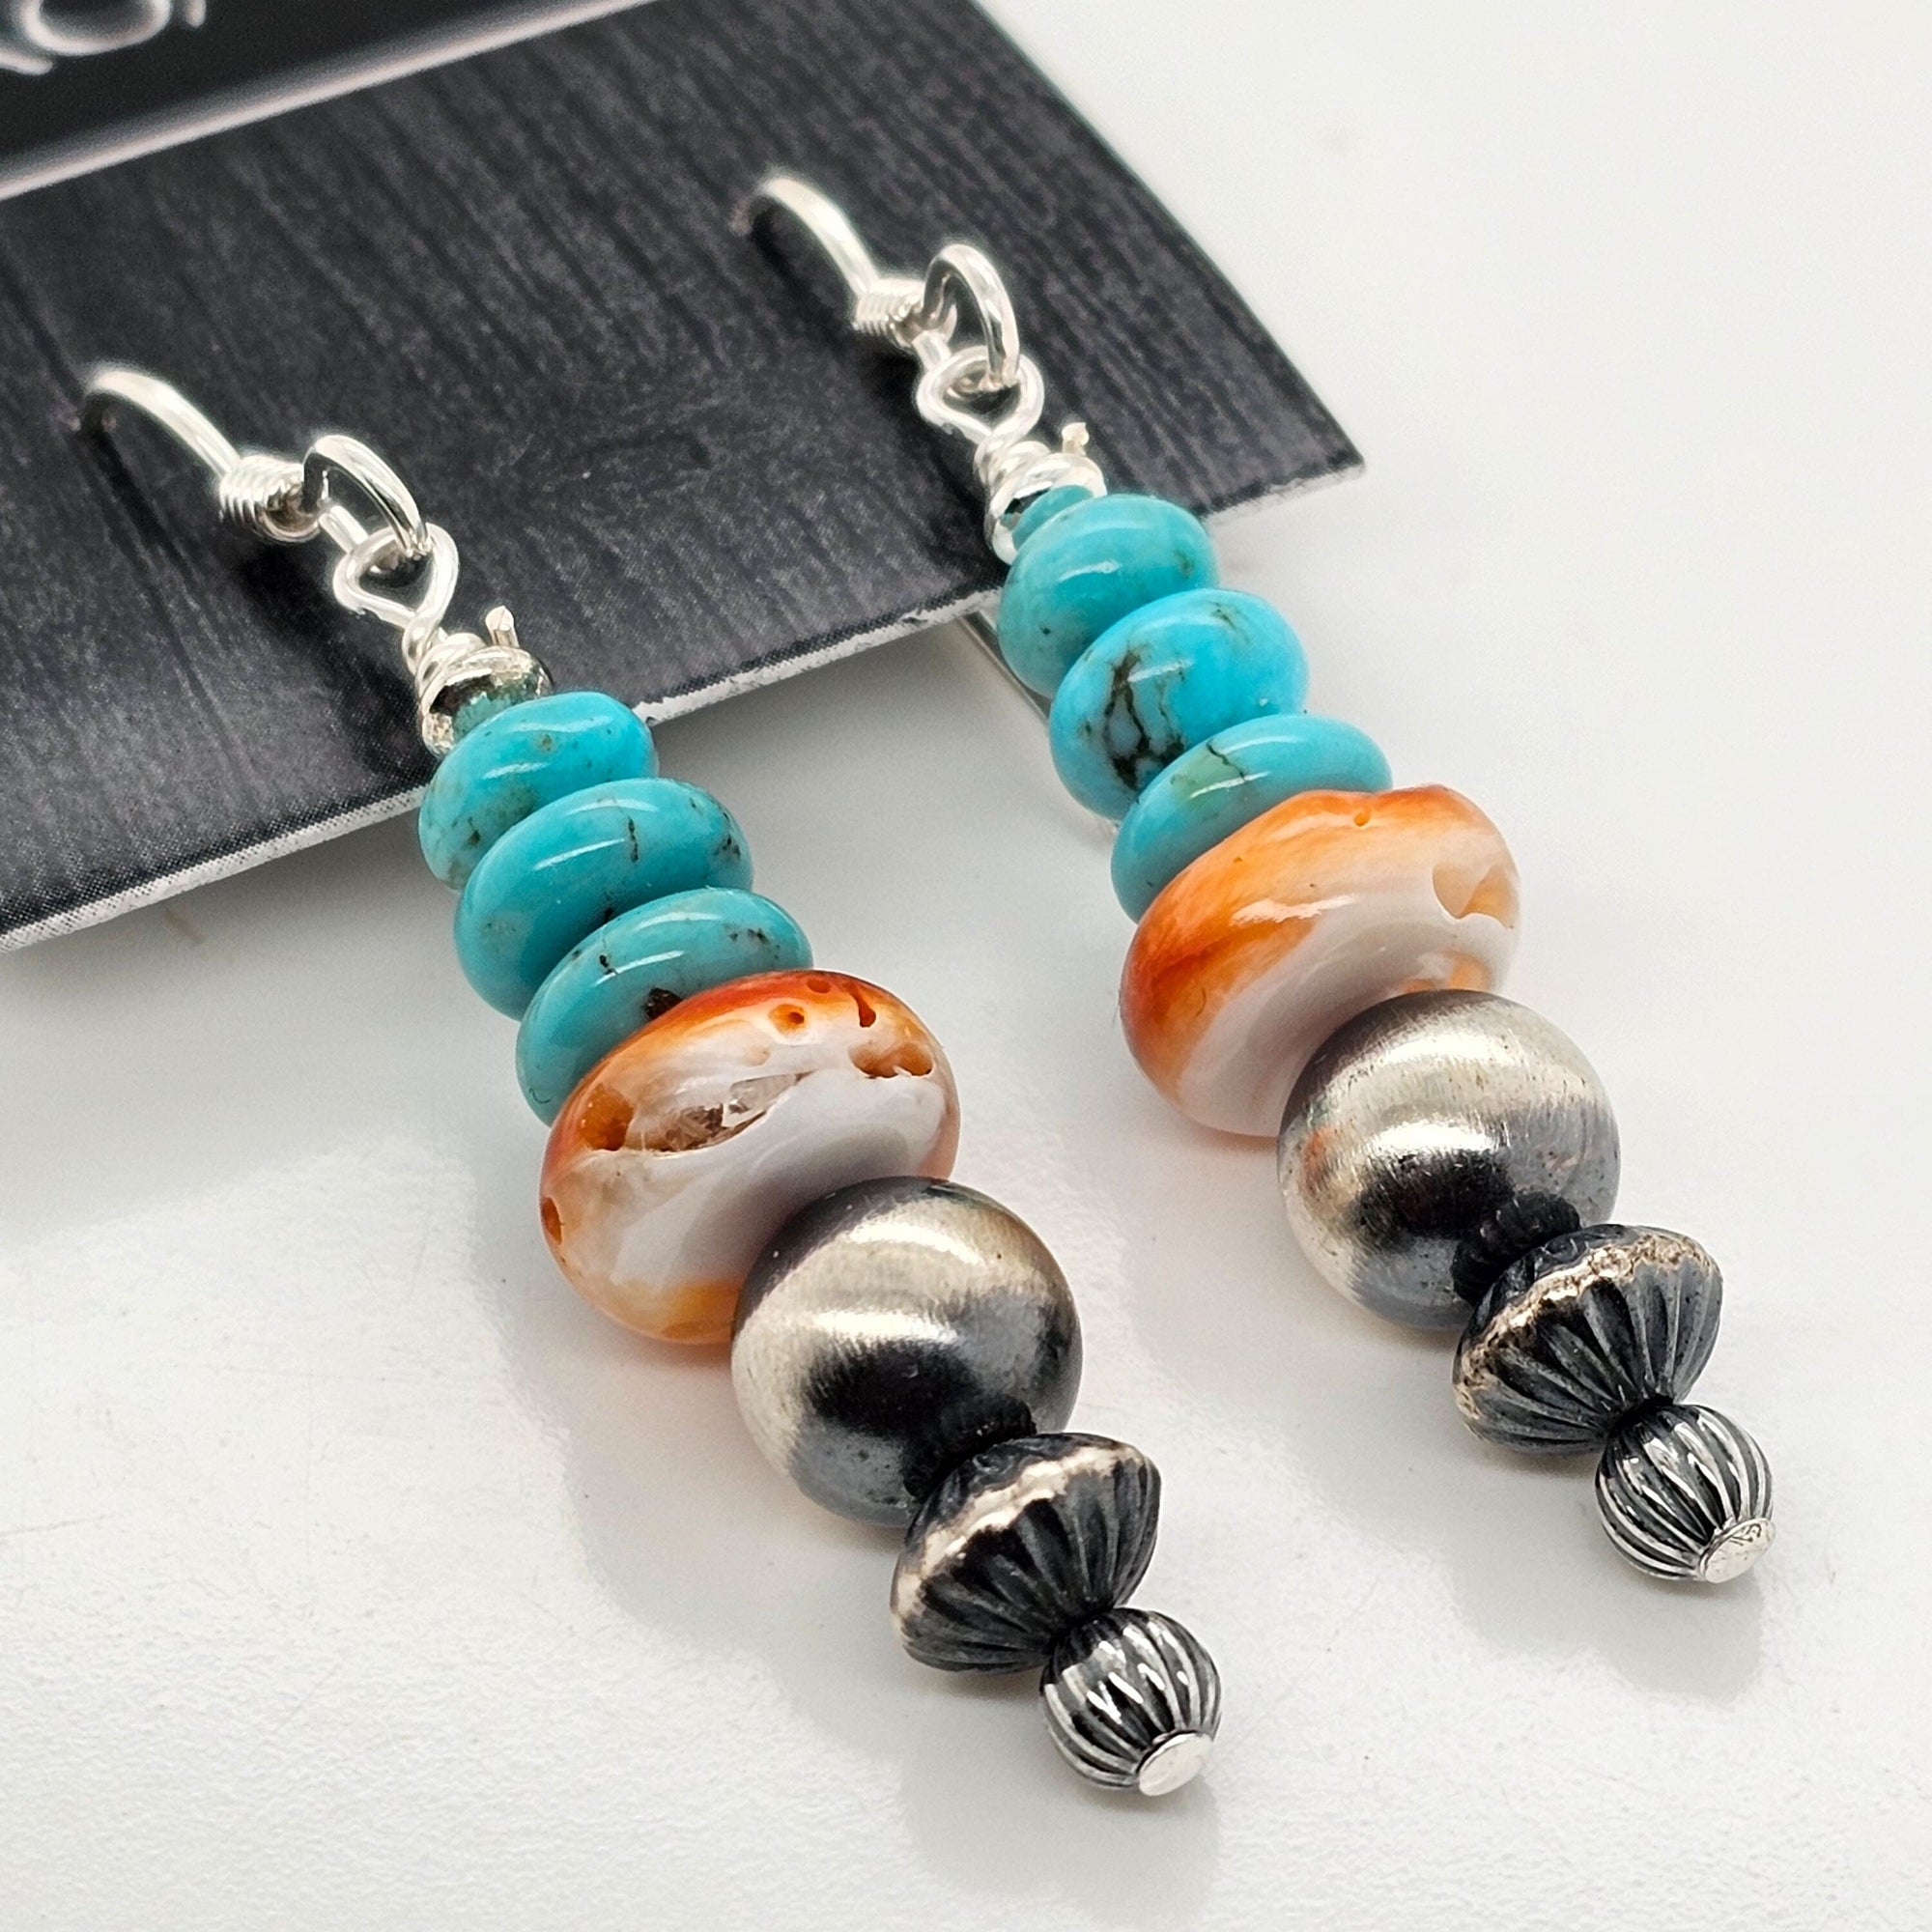 Turquoise / Spiny O / Stacked Earrings - ESZ161